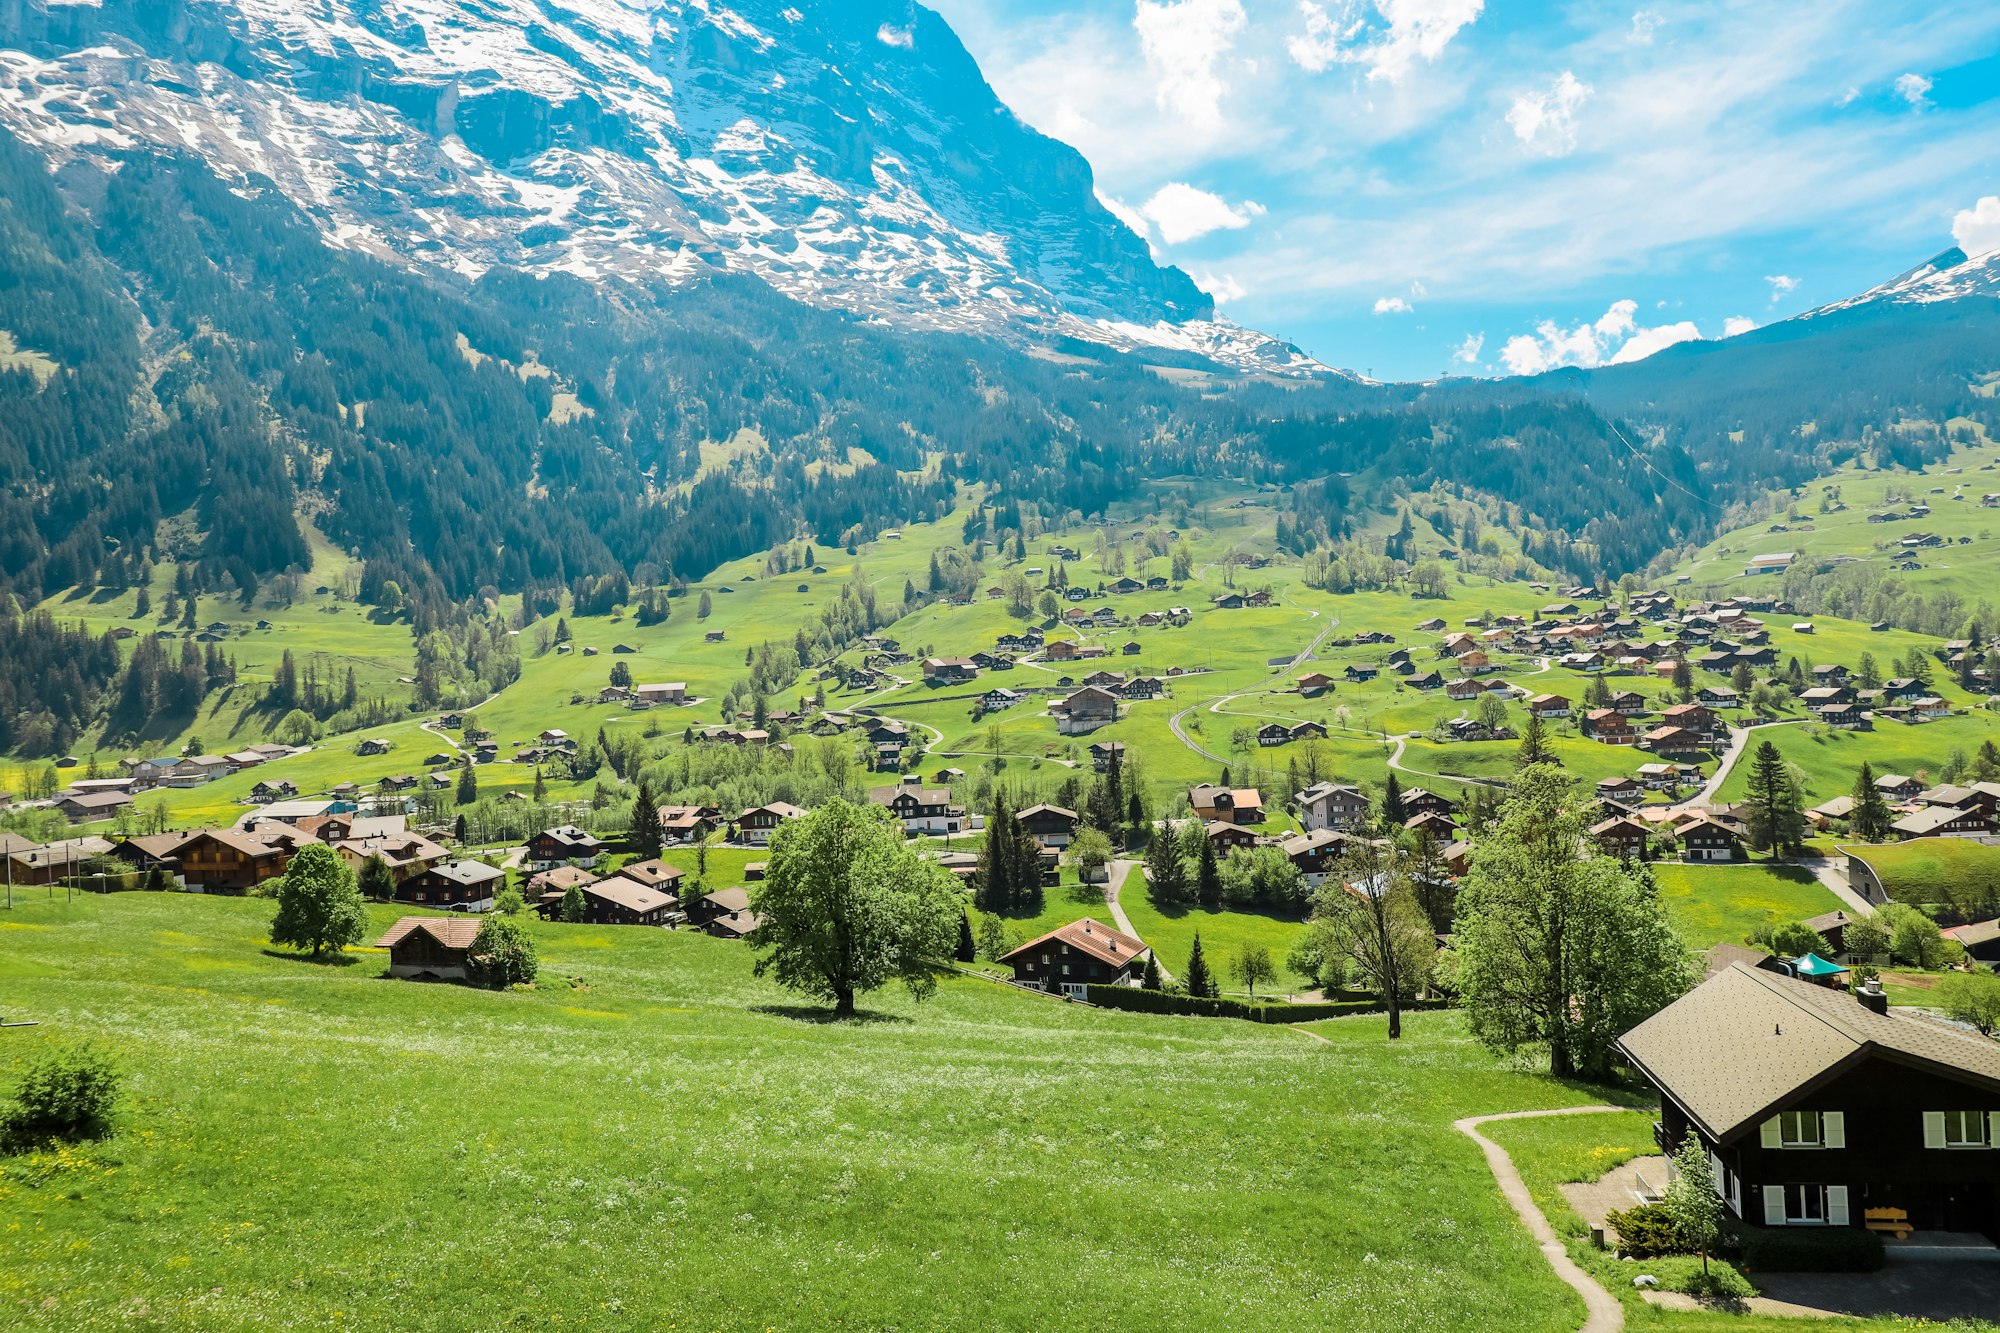 Grindelwald is a lovely place. One of the most beautiful place in Switzerland.